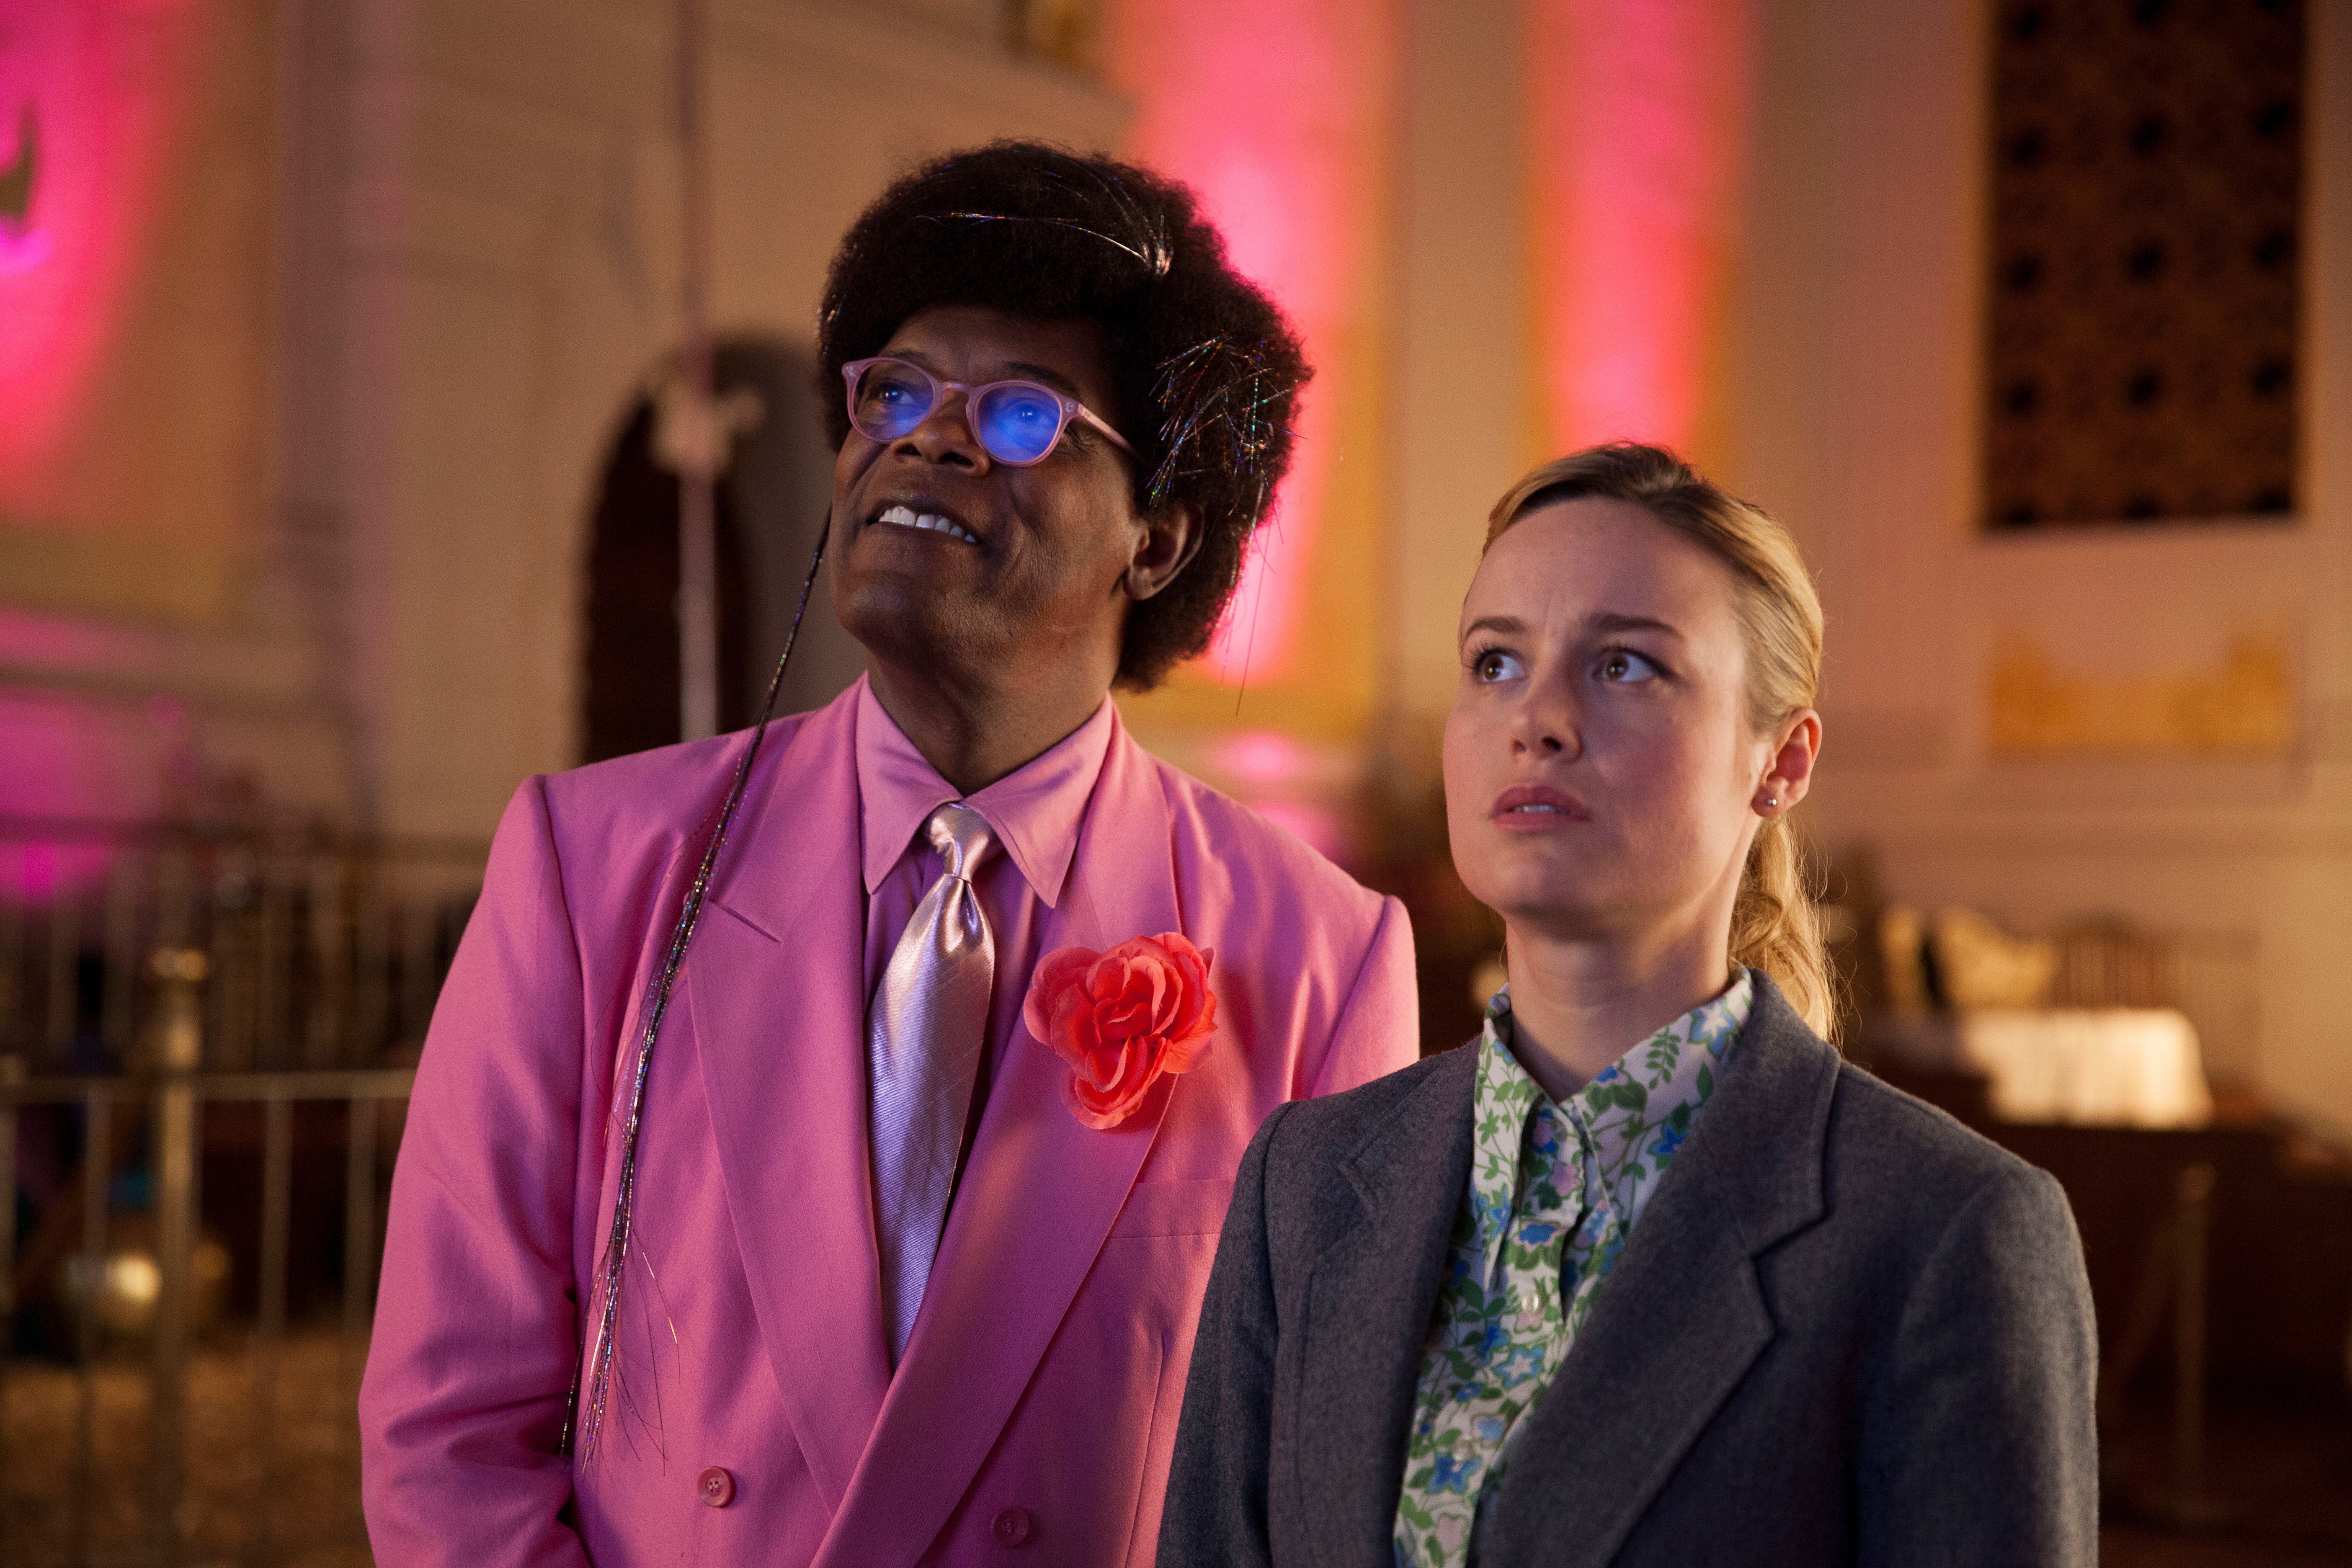 Samuel L Jackson in a pink suit and Brie Larson in a flowered shirt stare off into the distance.